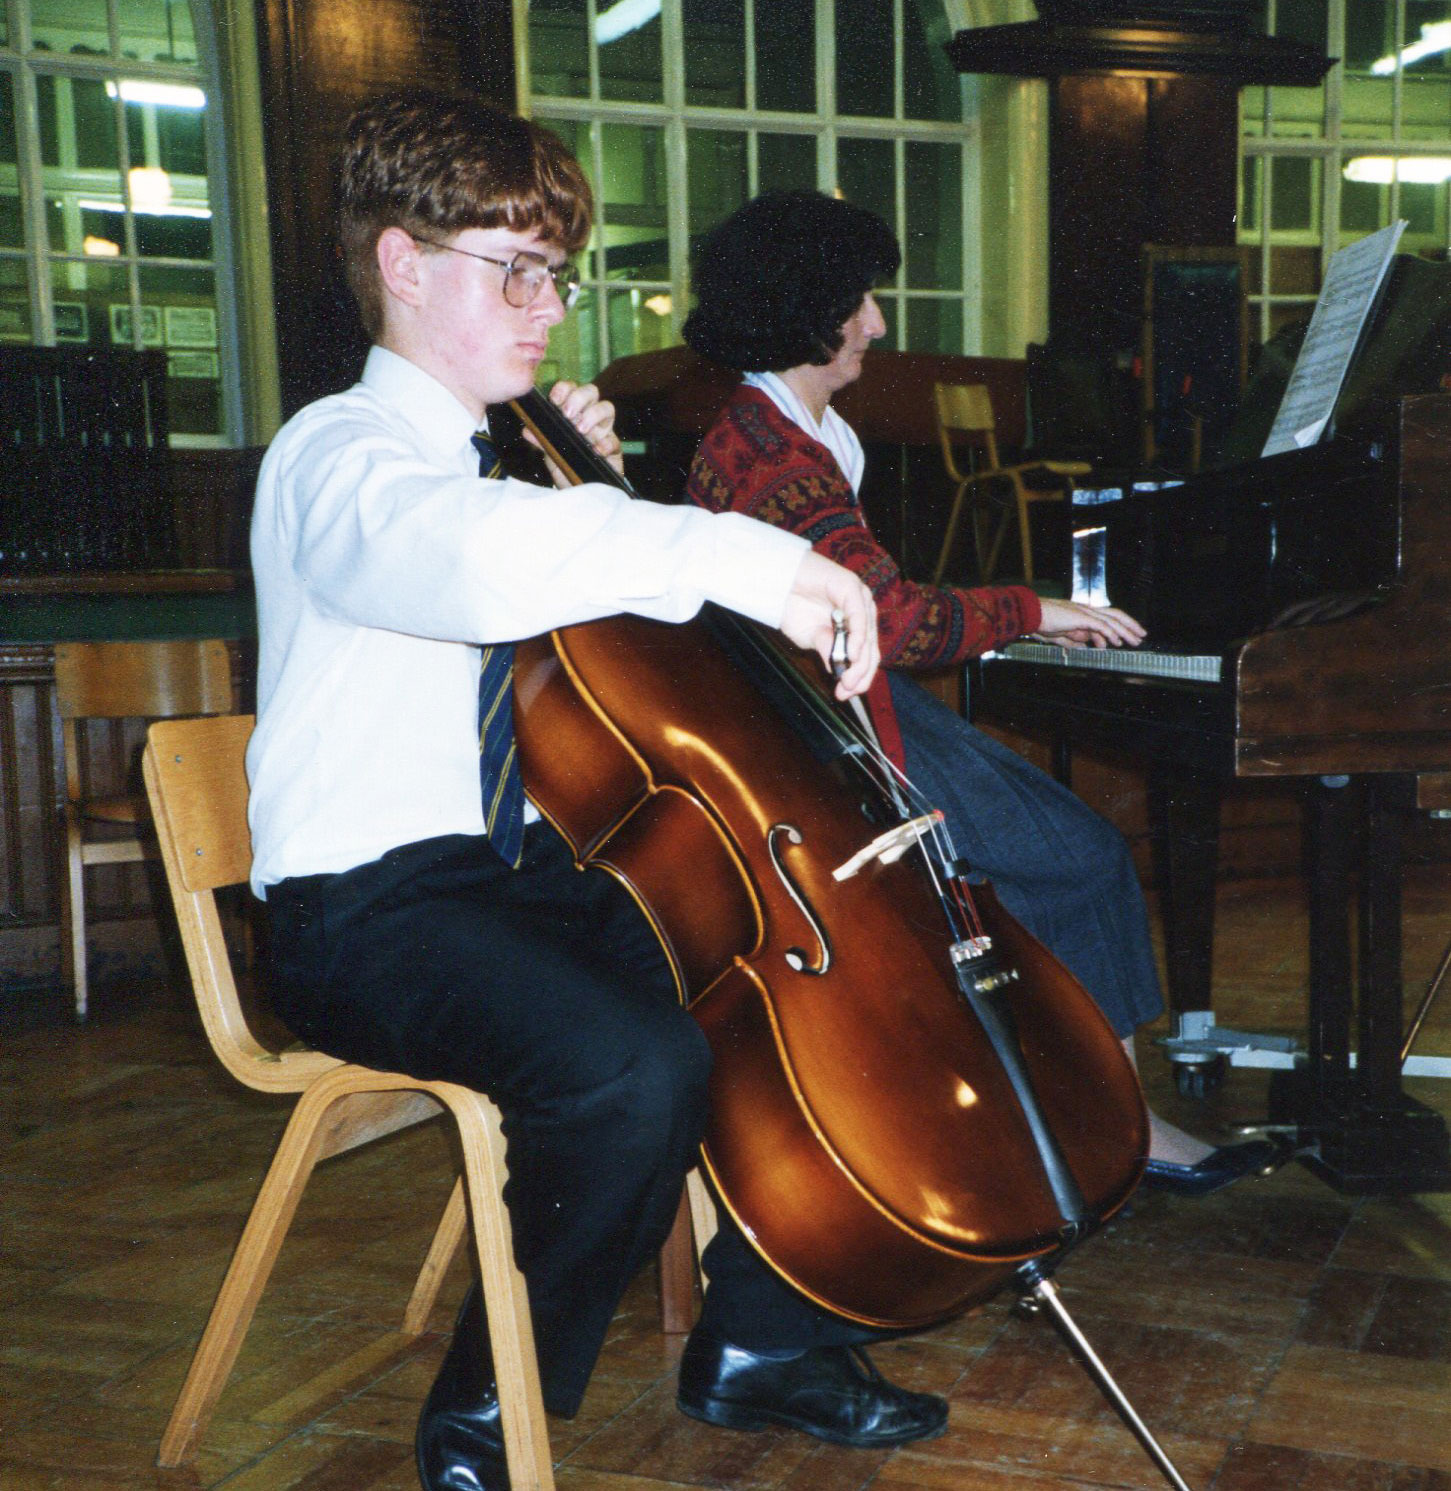 Ian playing the 'cello at school